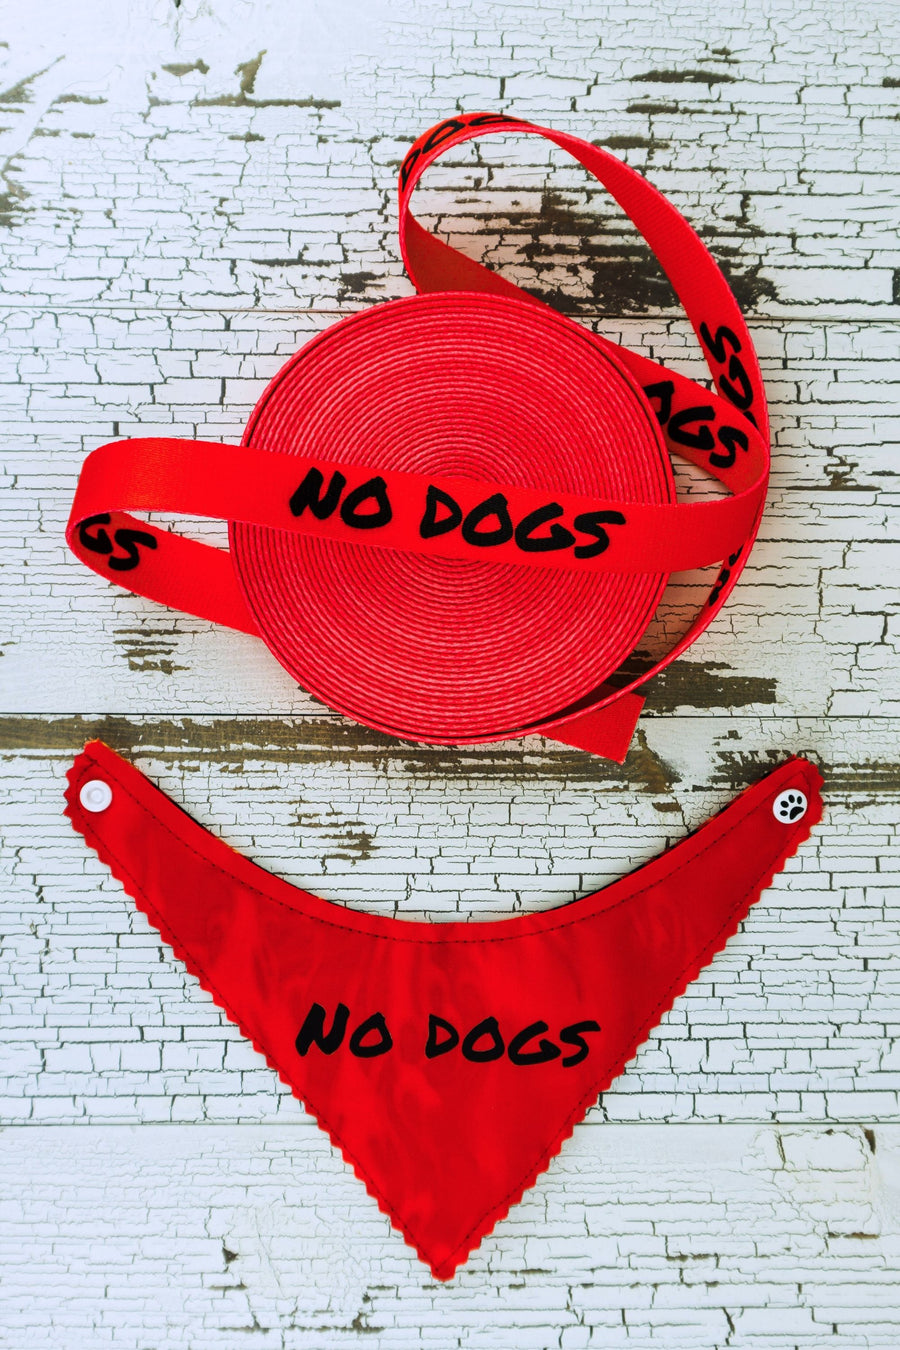 red webbing with the message "no dogs" is shown next to a red reflective bandana with the message "no dogs".